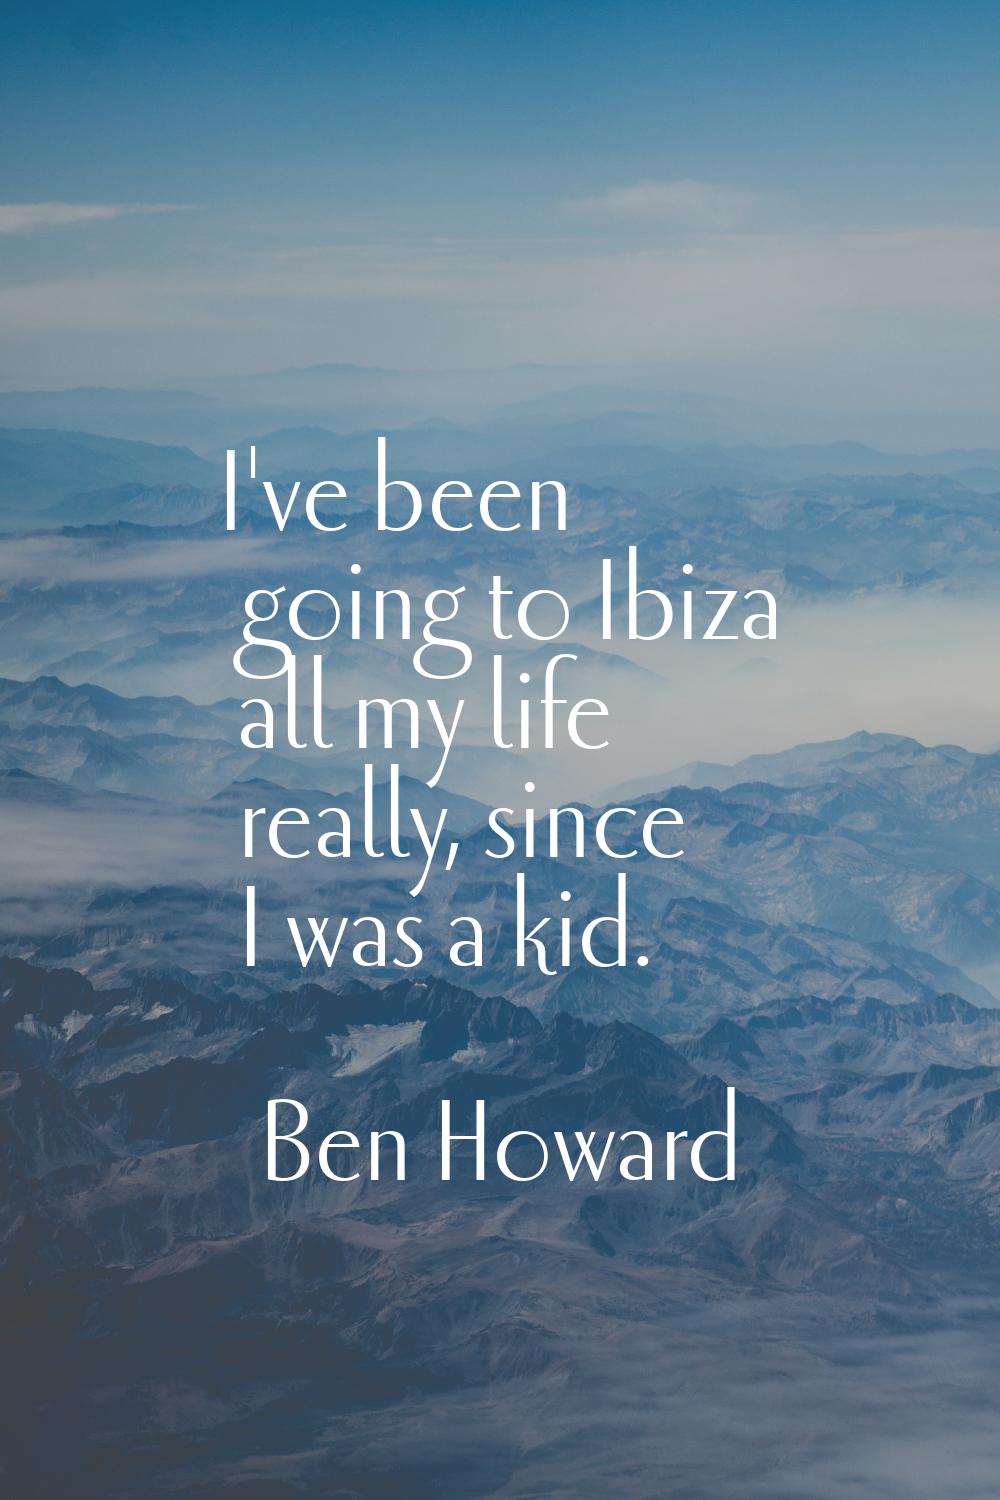 I've been going to Ibiza all my life really, since I was a kid.